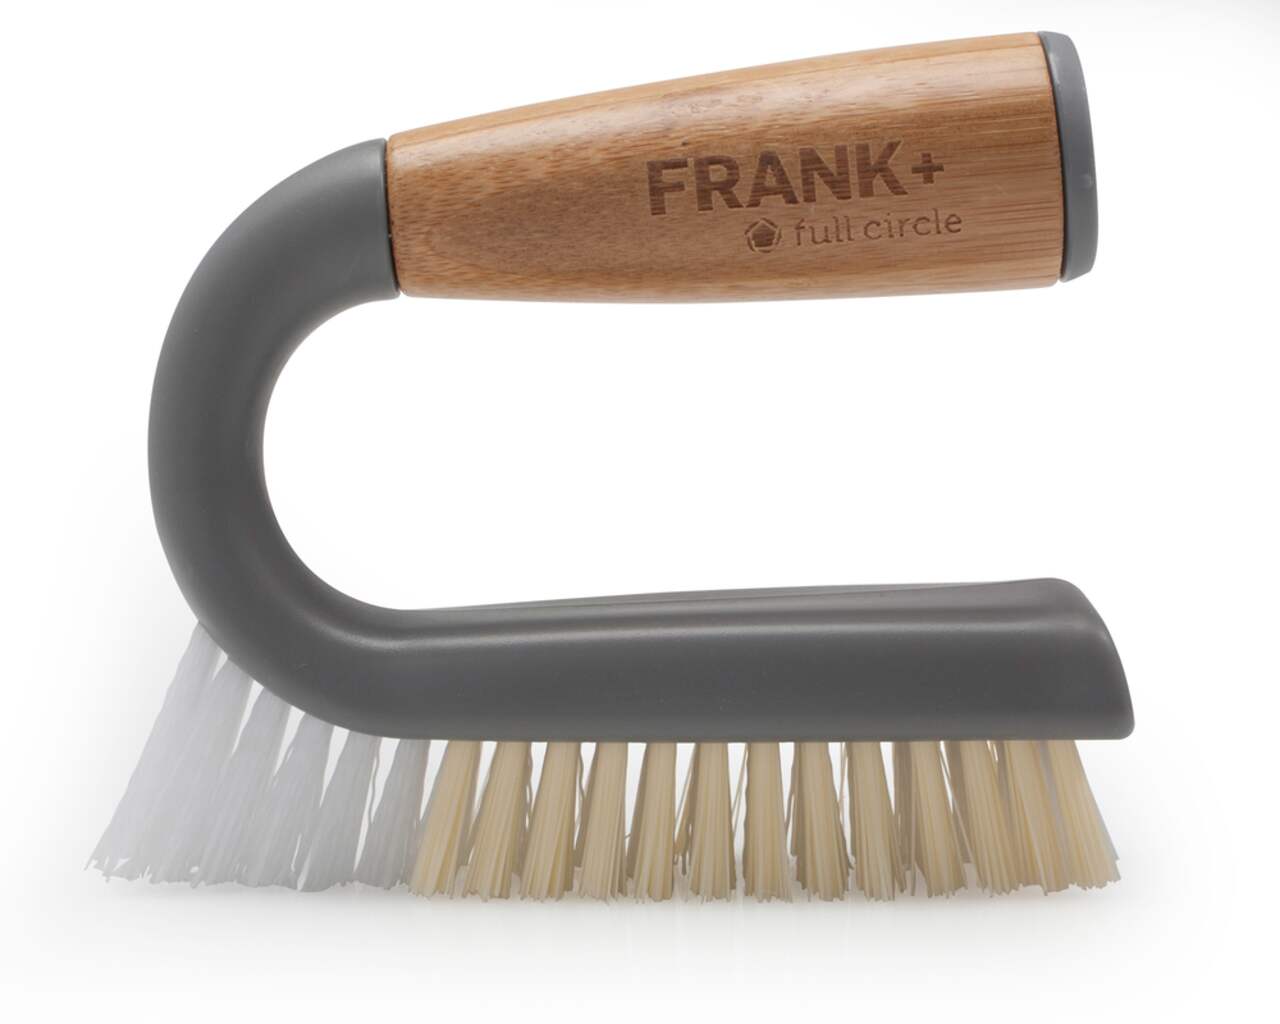 https://media-www.canadiantire.ca/product/living/cleaning/household-cleaning-tools/1420439/frank-by-full-circle-grout-and-tile-brush-f2abeb0a-4ec1-4404-9c06-f9dda6aa1df5.png?imdensity=1&imwidth=1244&impolicy=mZoom